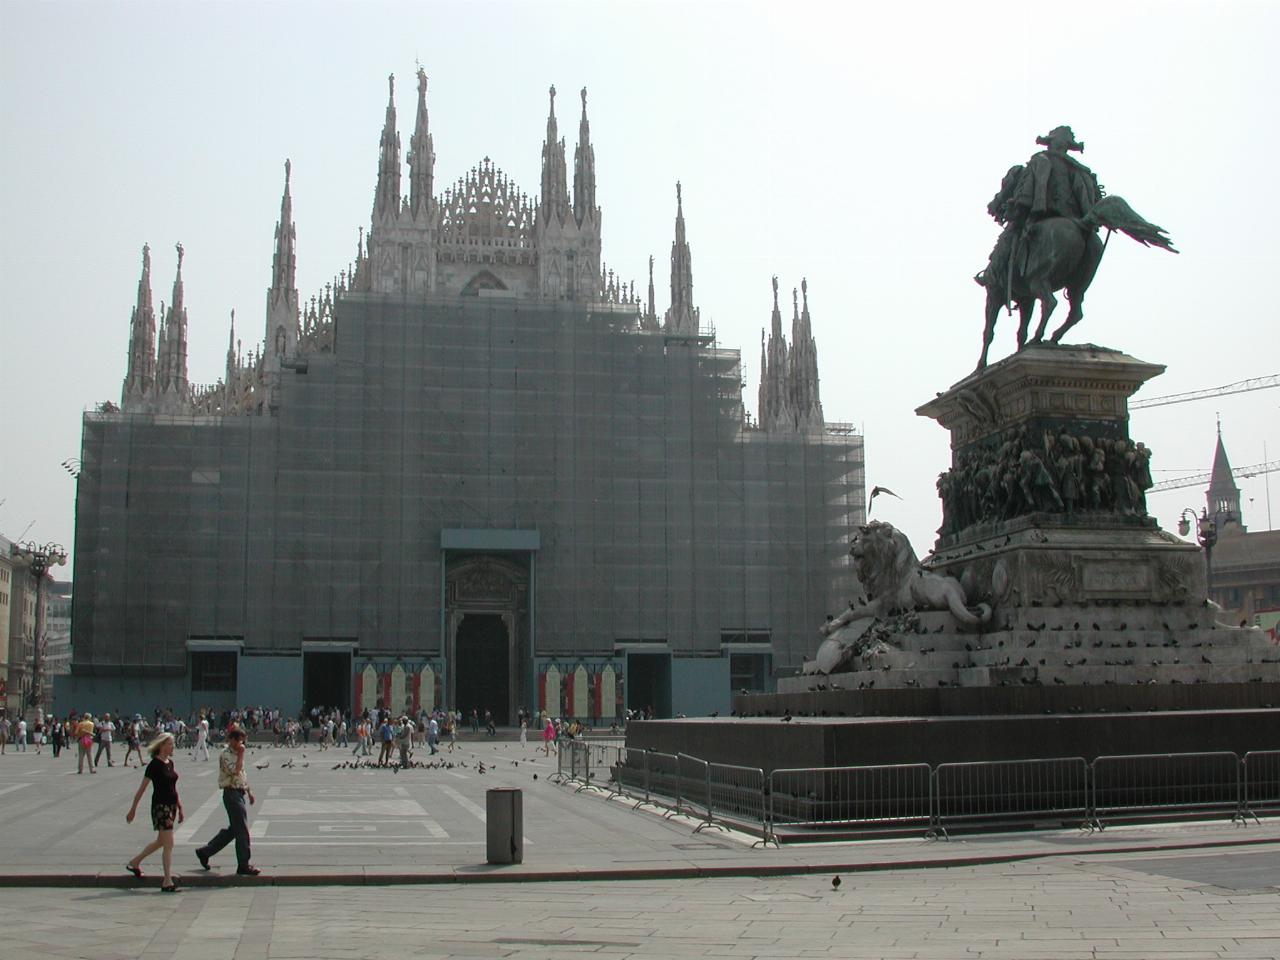 Milan's Cathedral is undergoing restoration!  Hence the scaffolding hiding the front